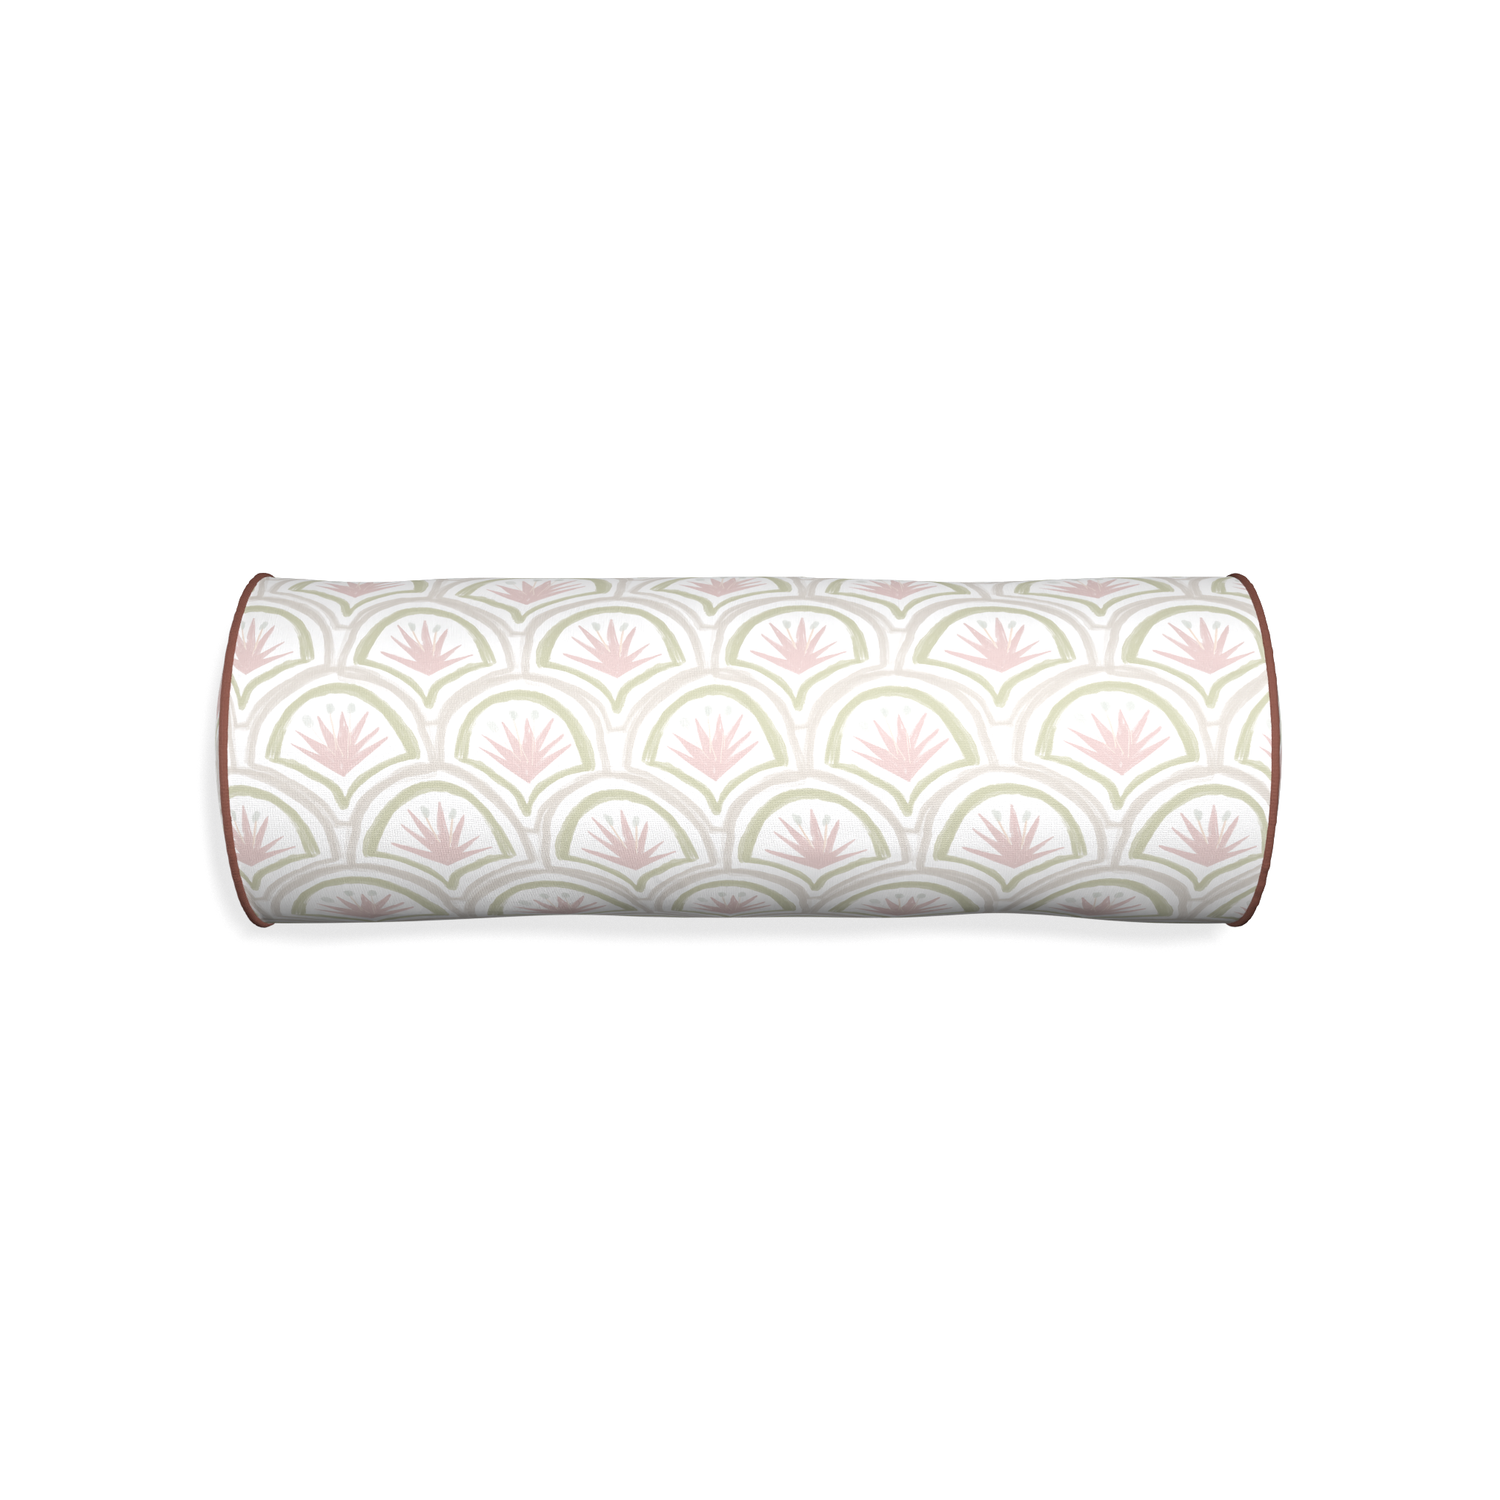 Bolster thatcher rose custom pillow with w piping on white background